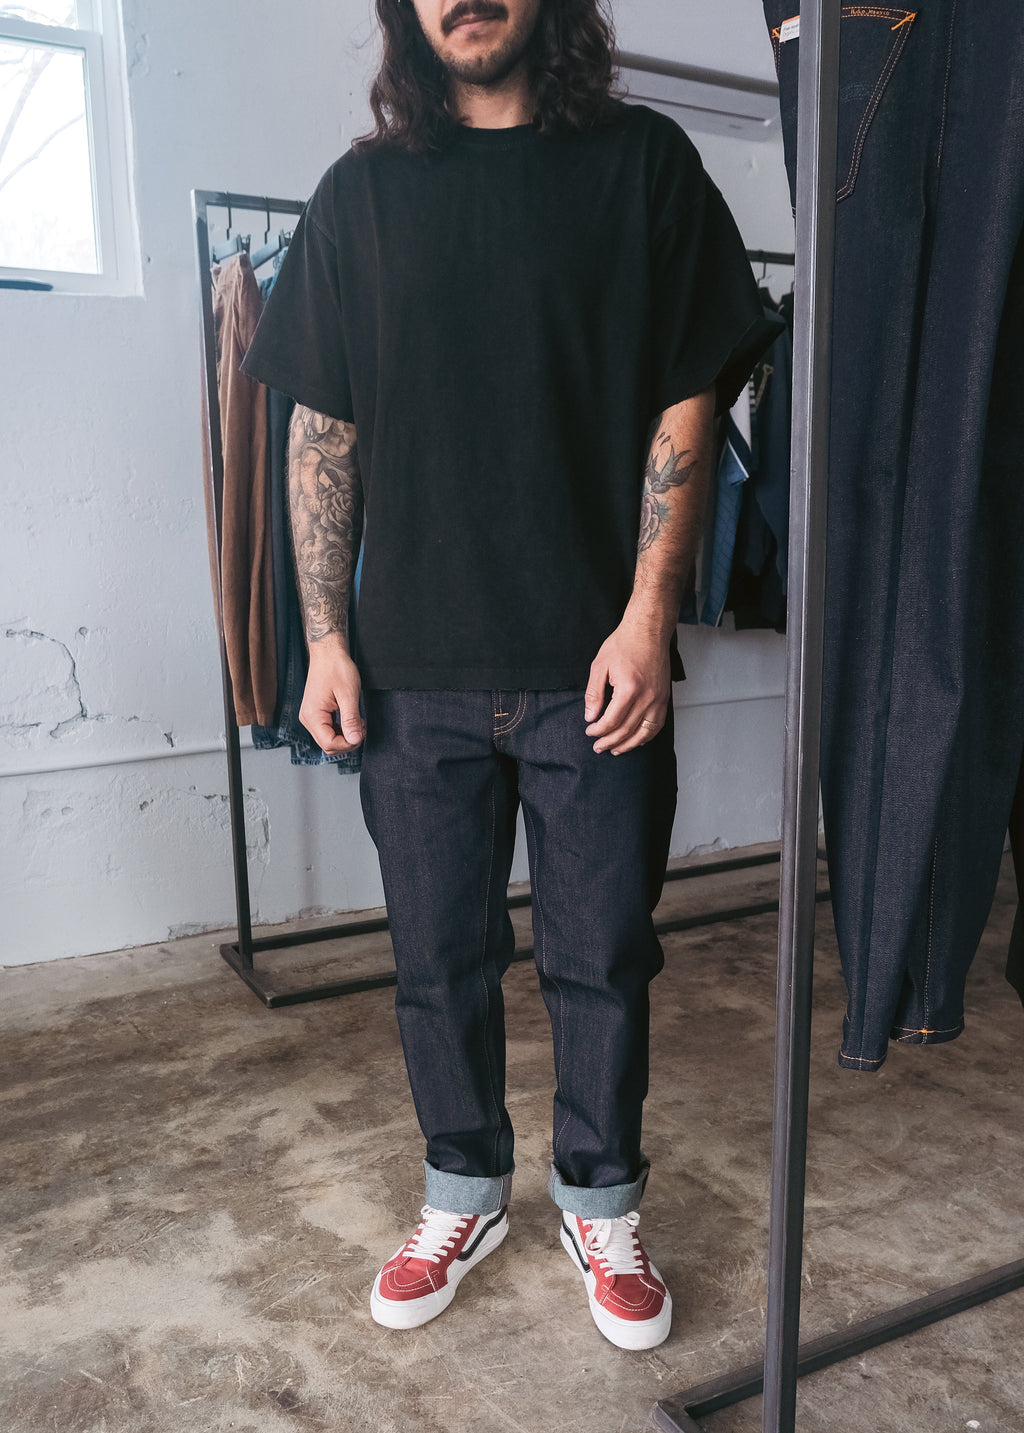 Nudie Jeans Gritty Jackson Dry Classic Navy